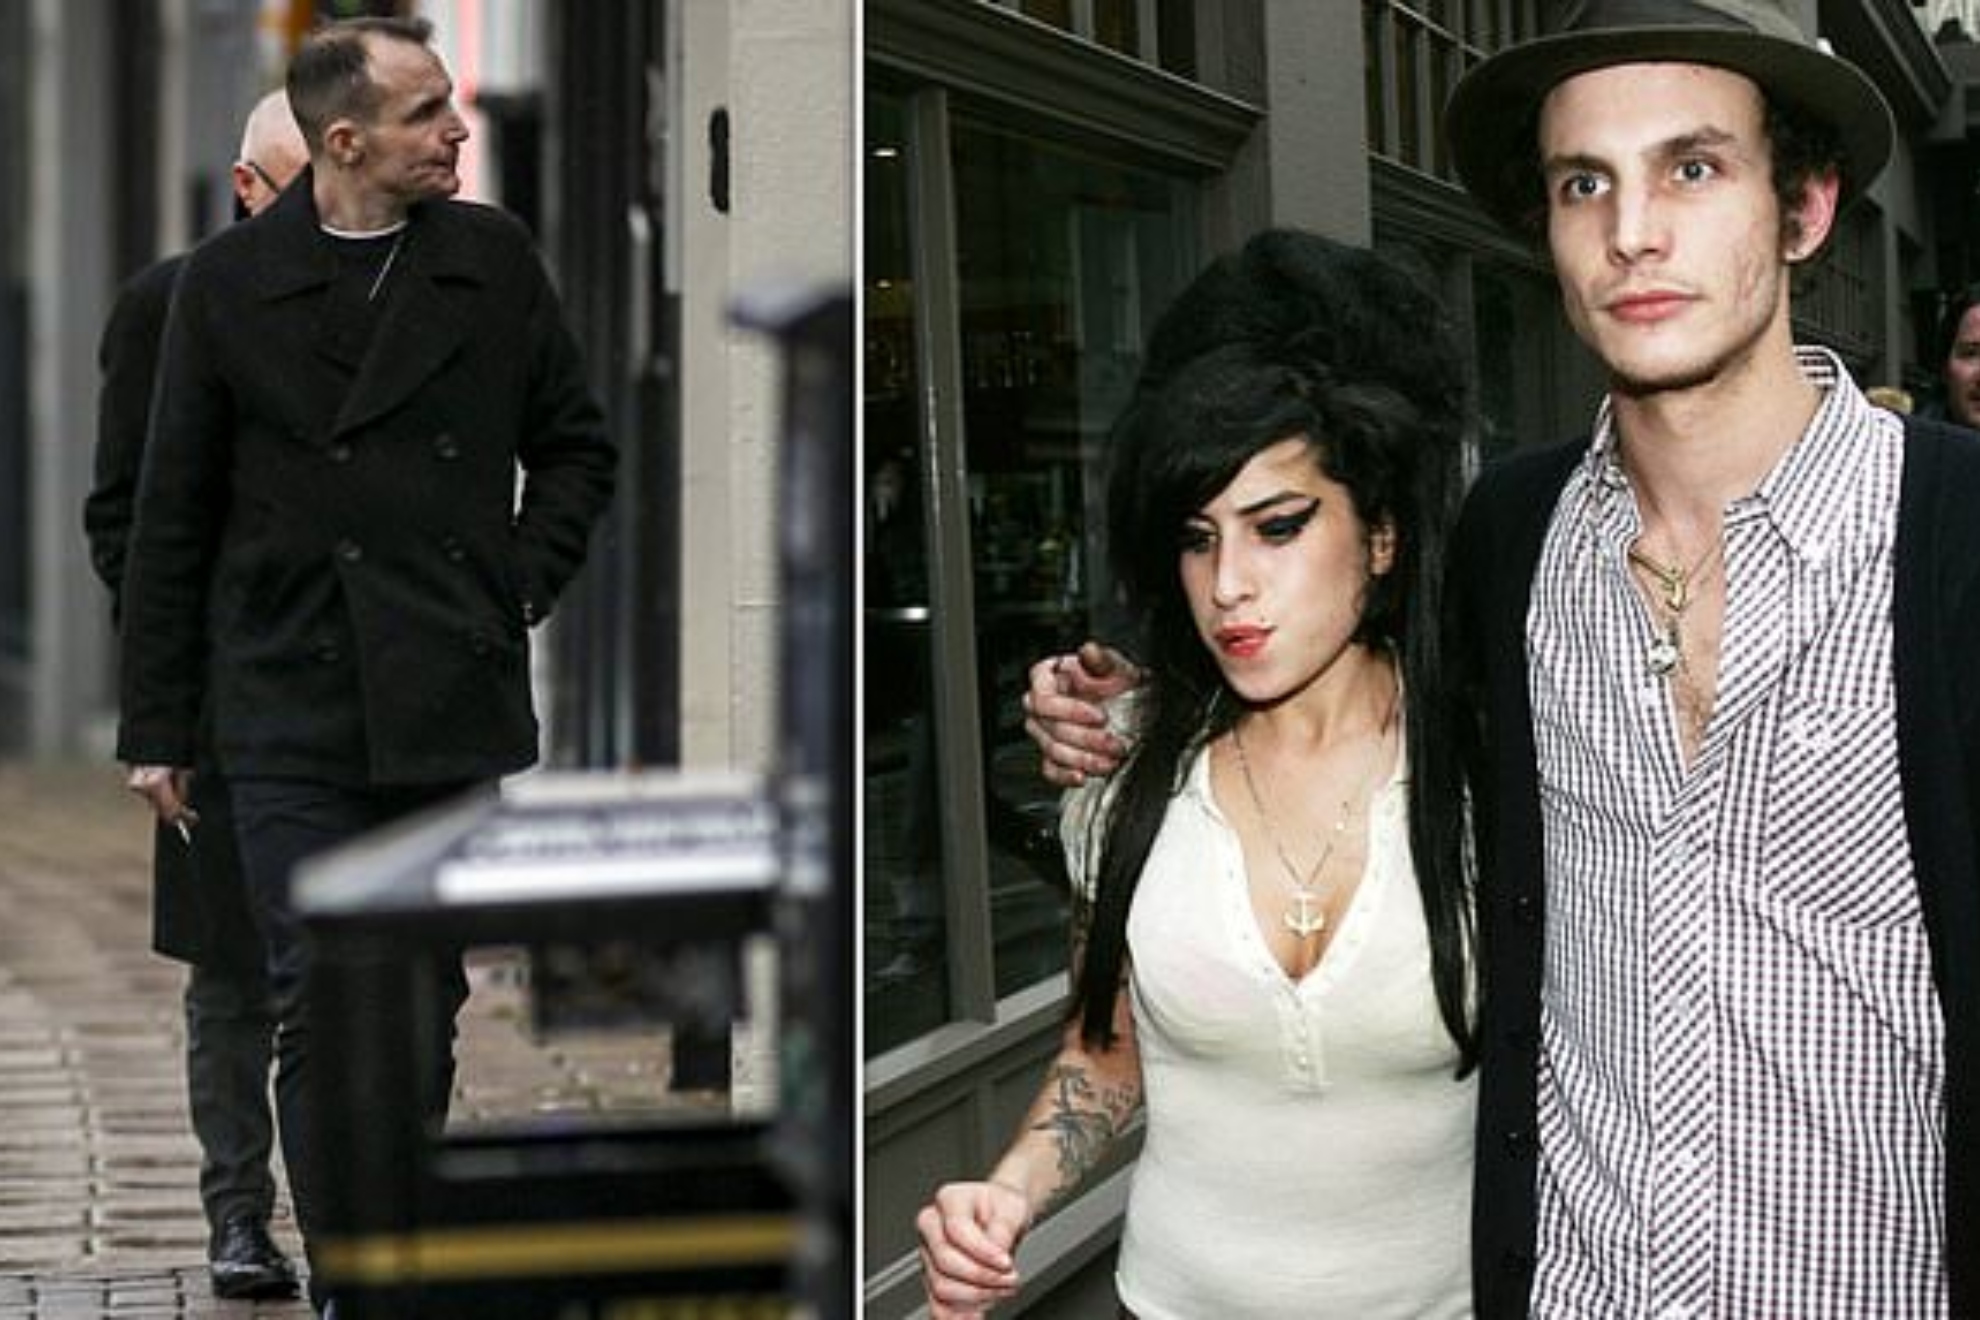 Amy Winehouses former brother-in-law dies of overdose at 27